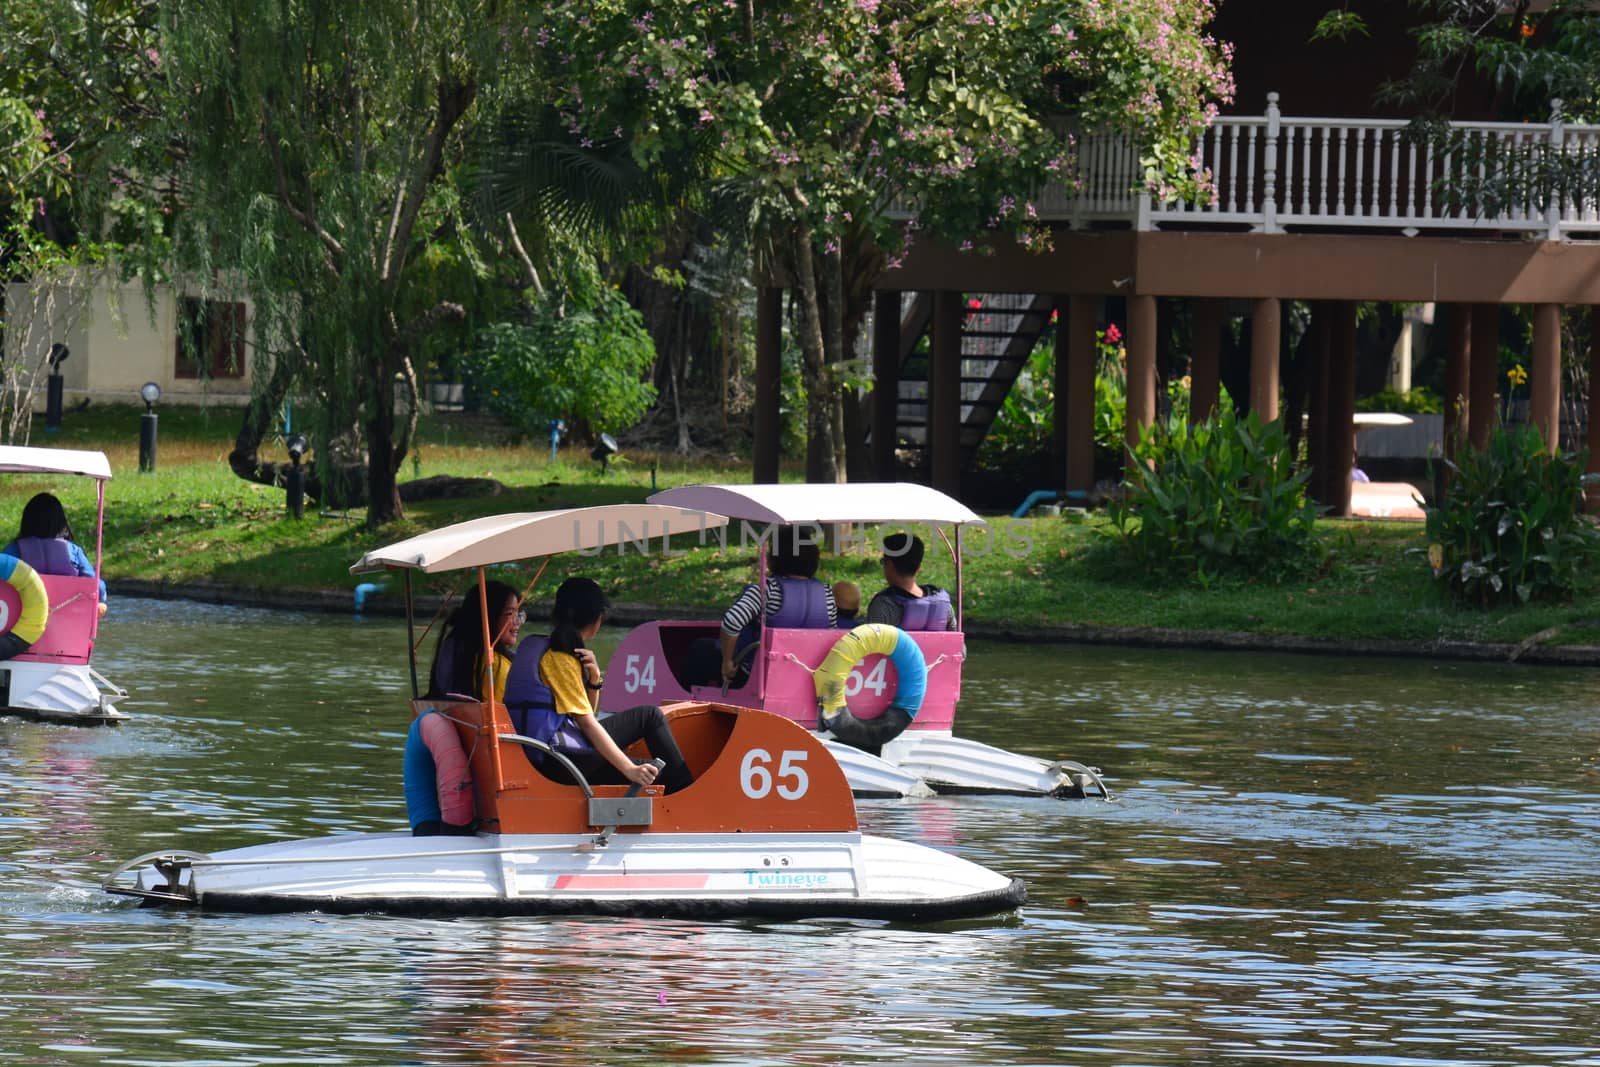 Spinning Pedal Boats At Dusit Zoo Lake by ideation90